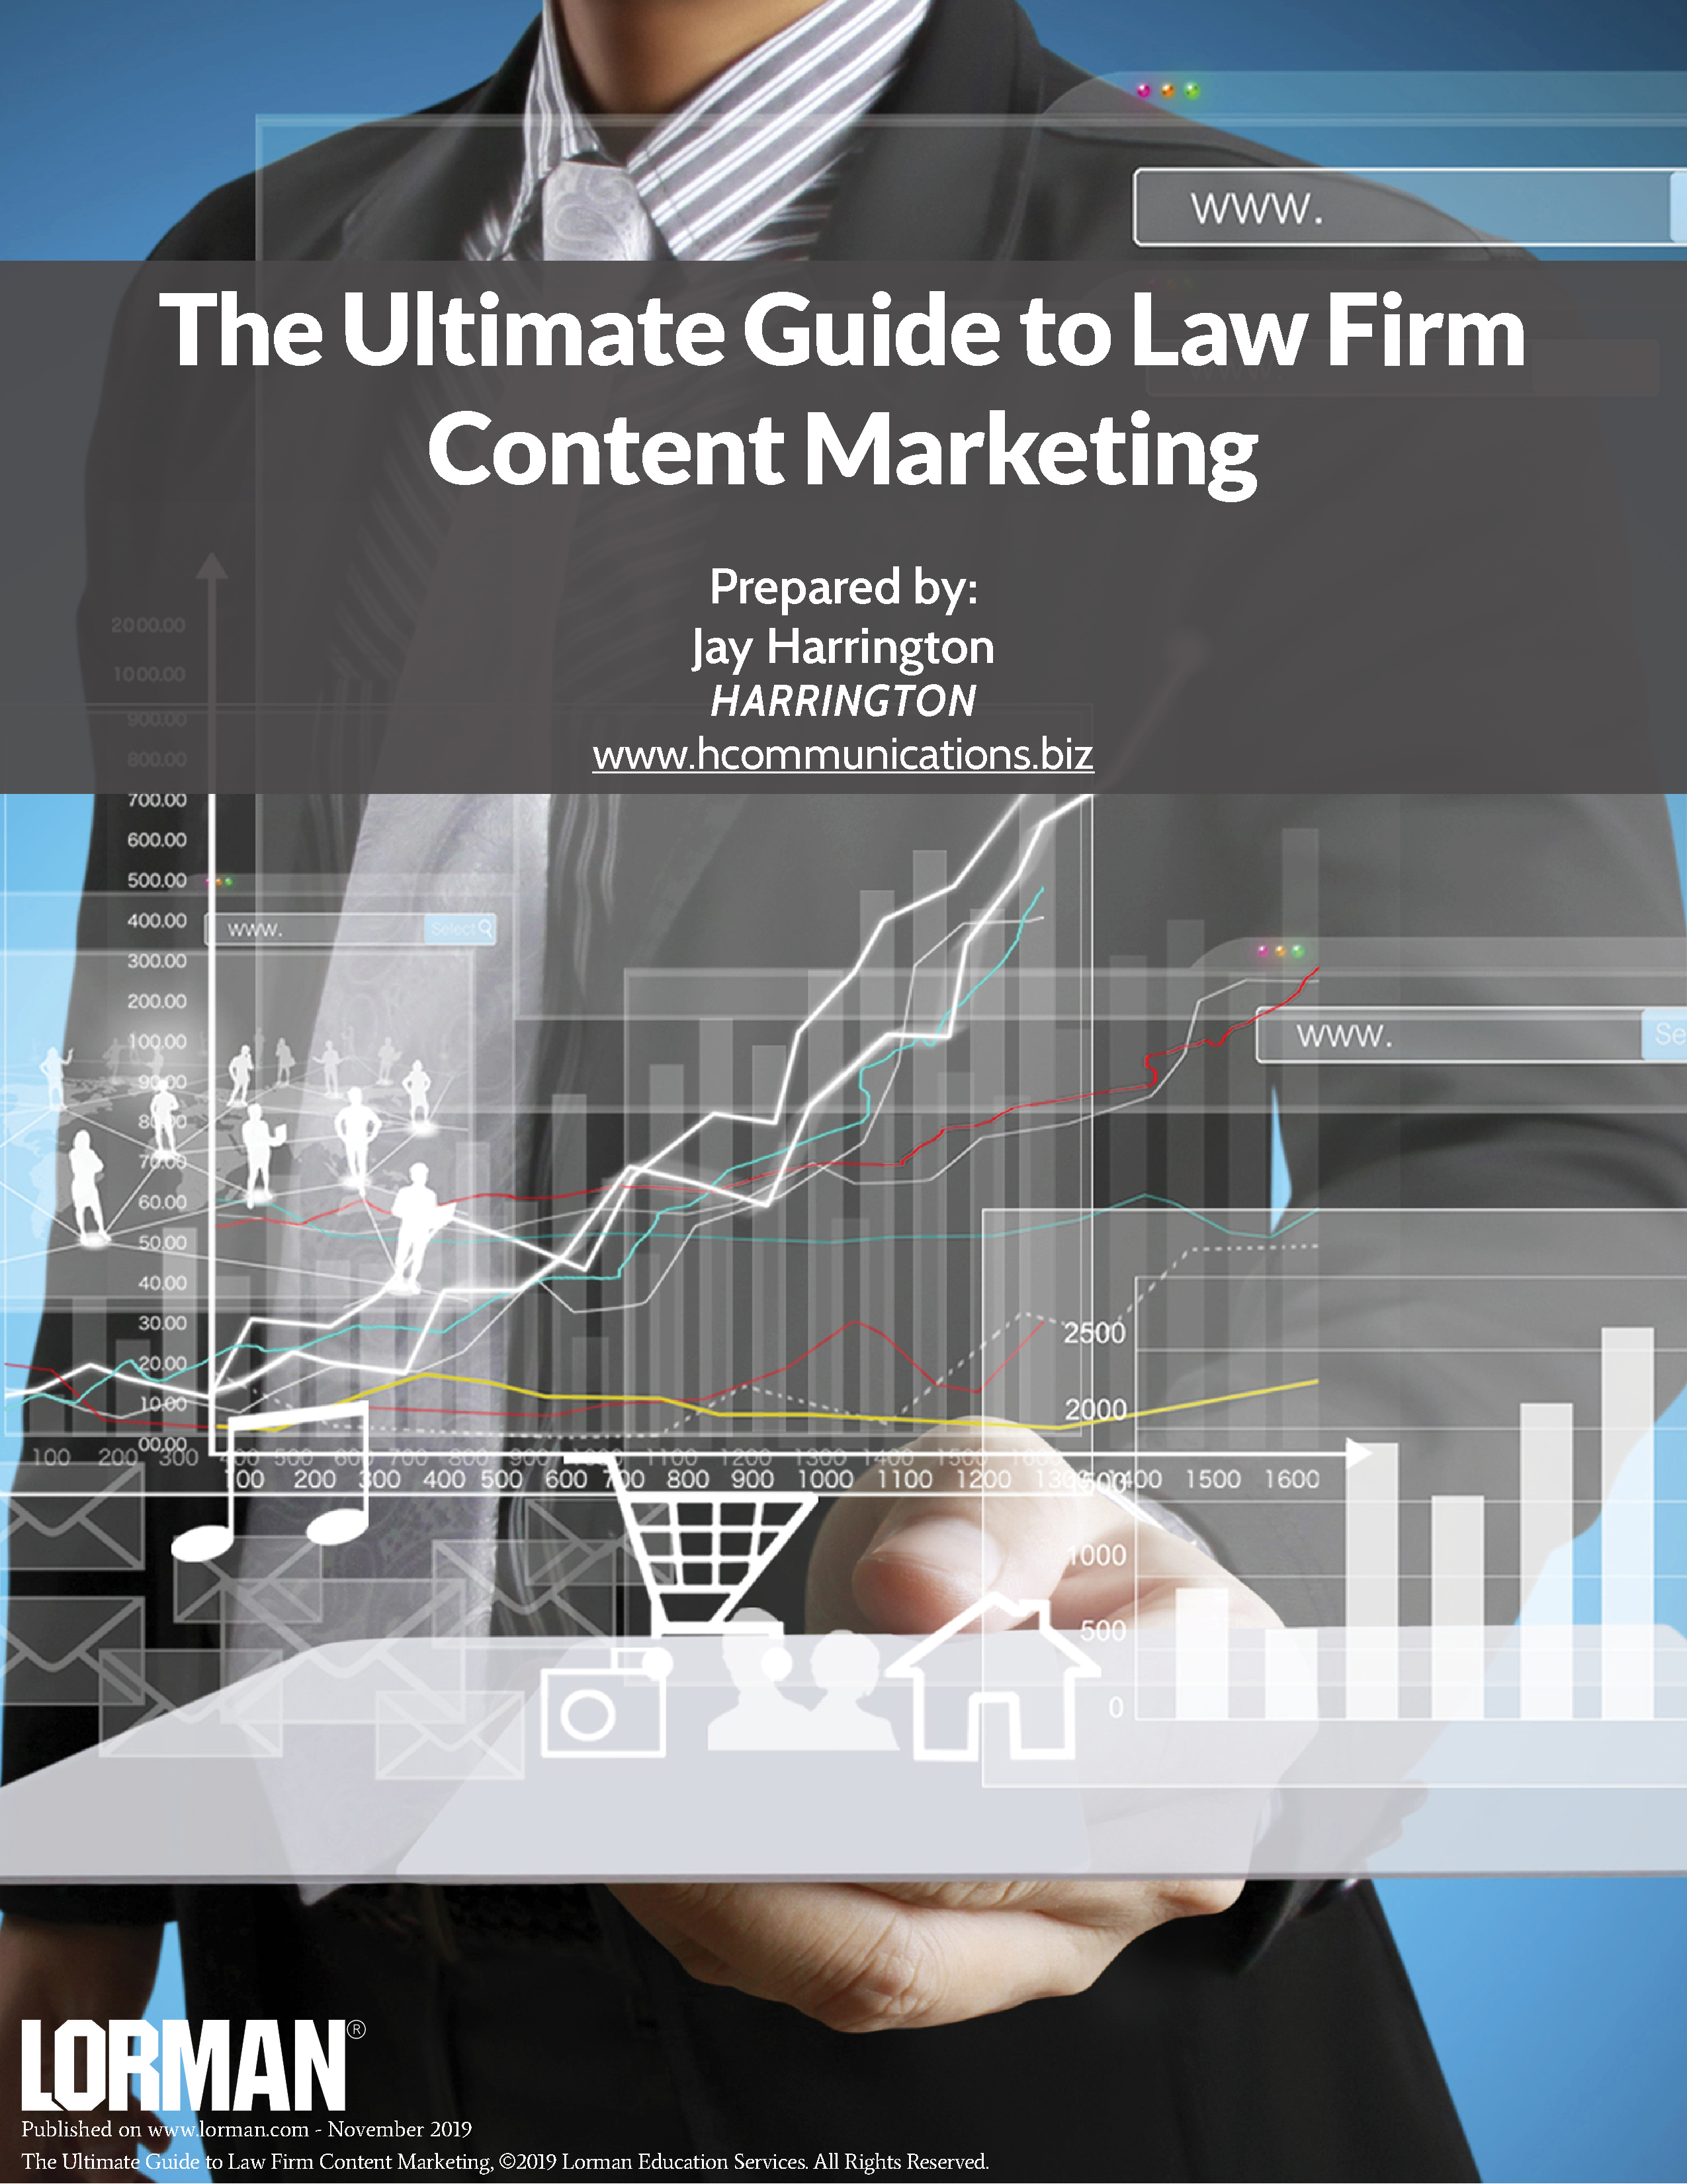 The Ultimate Guide to Law Firm Content Marketing